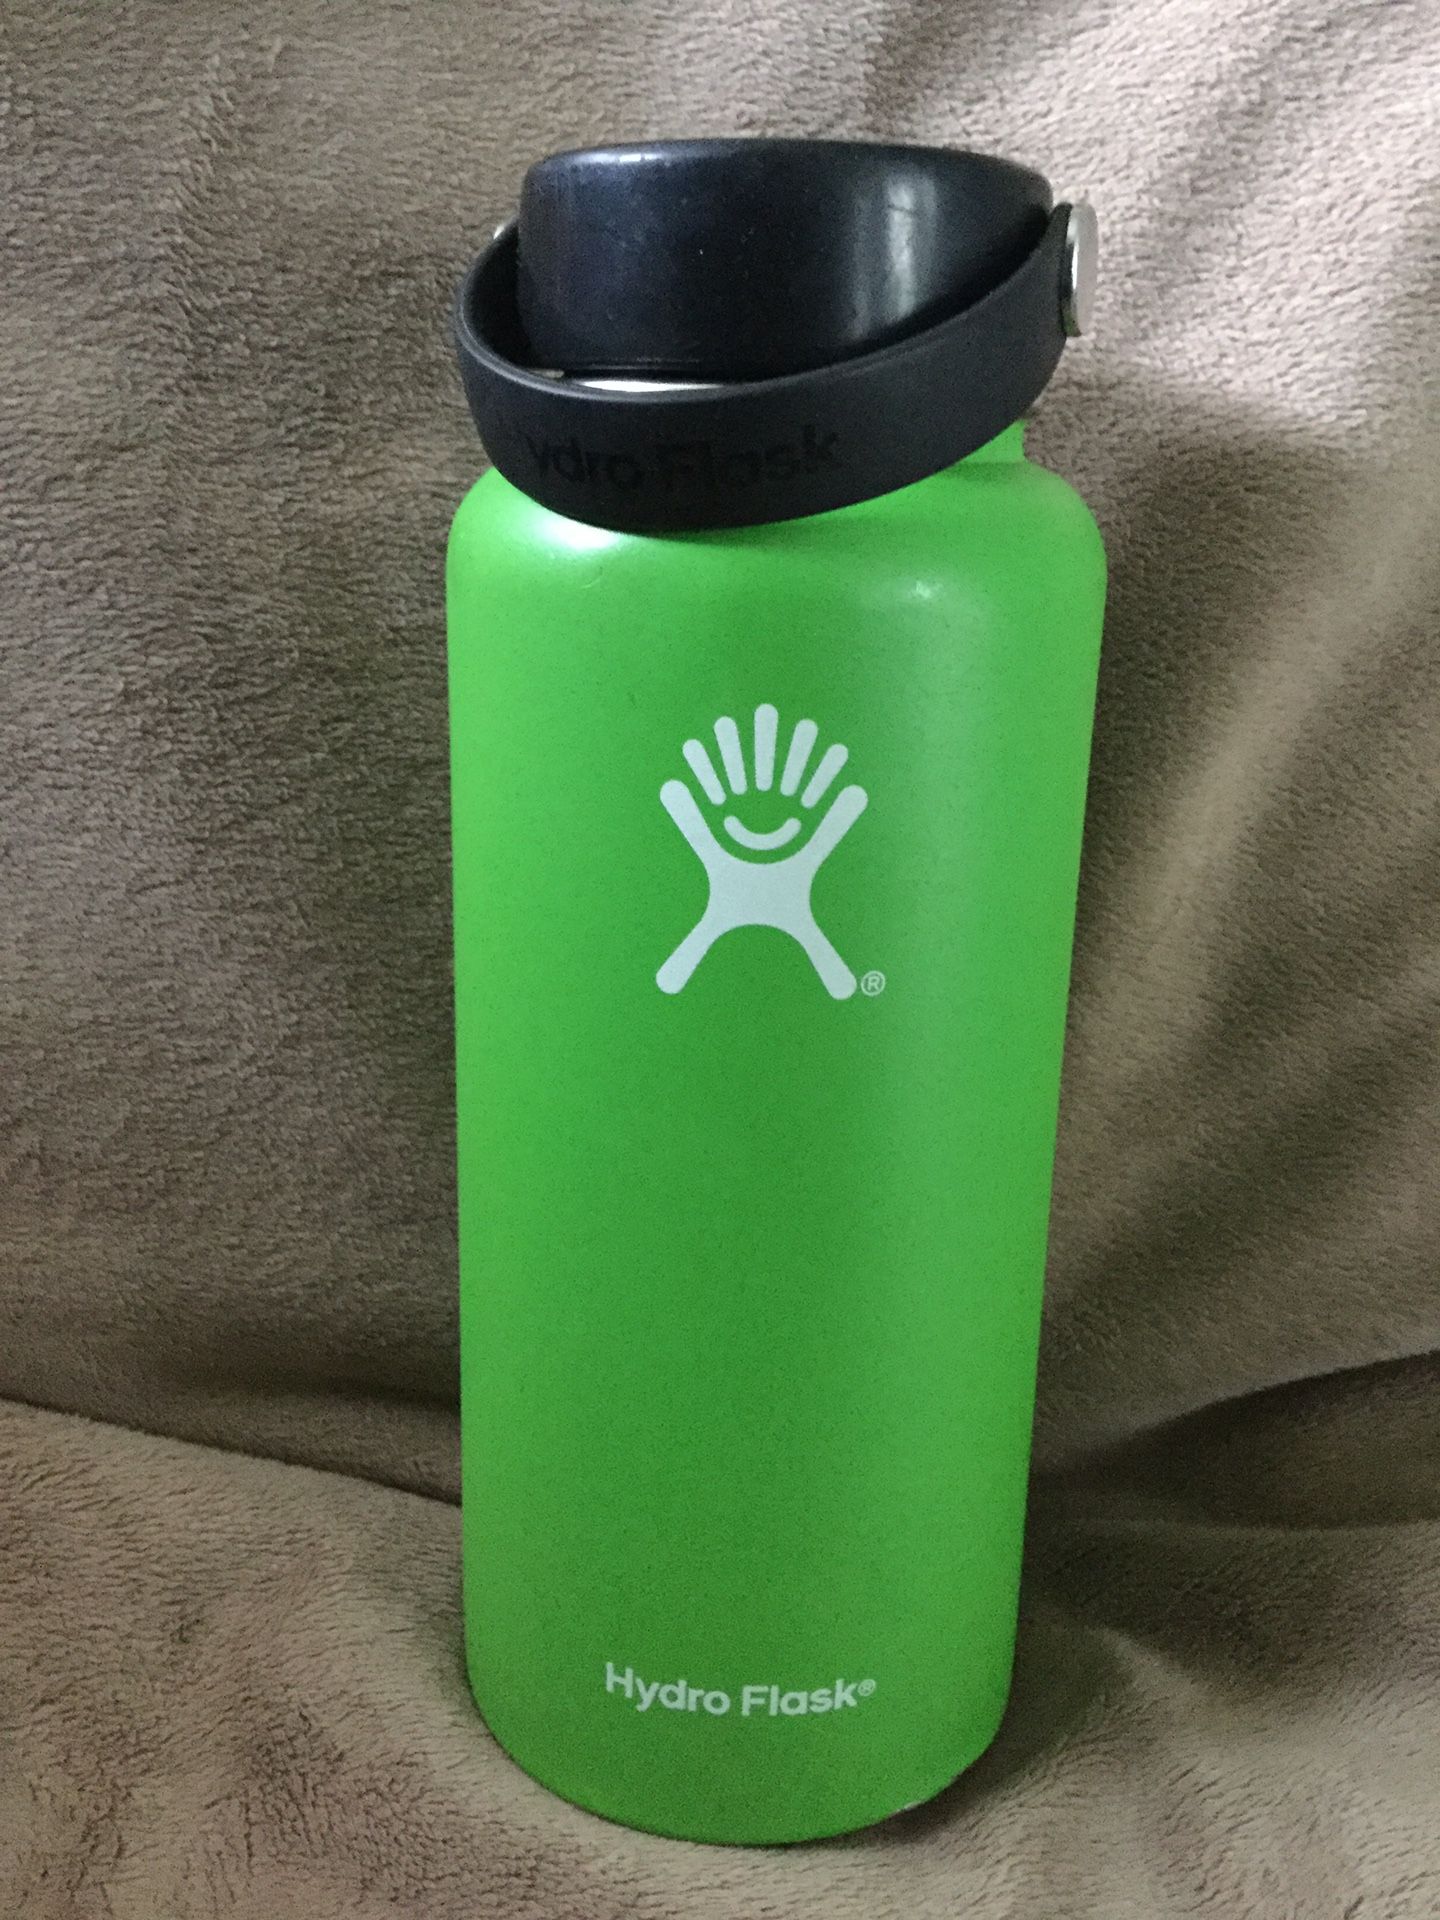 Hydro Flask 32oz wide mouth Lime green